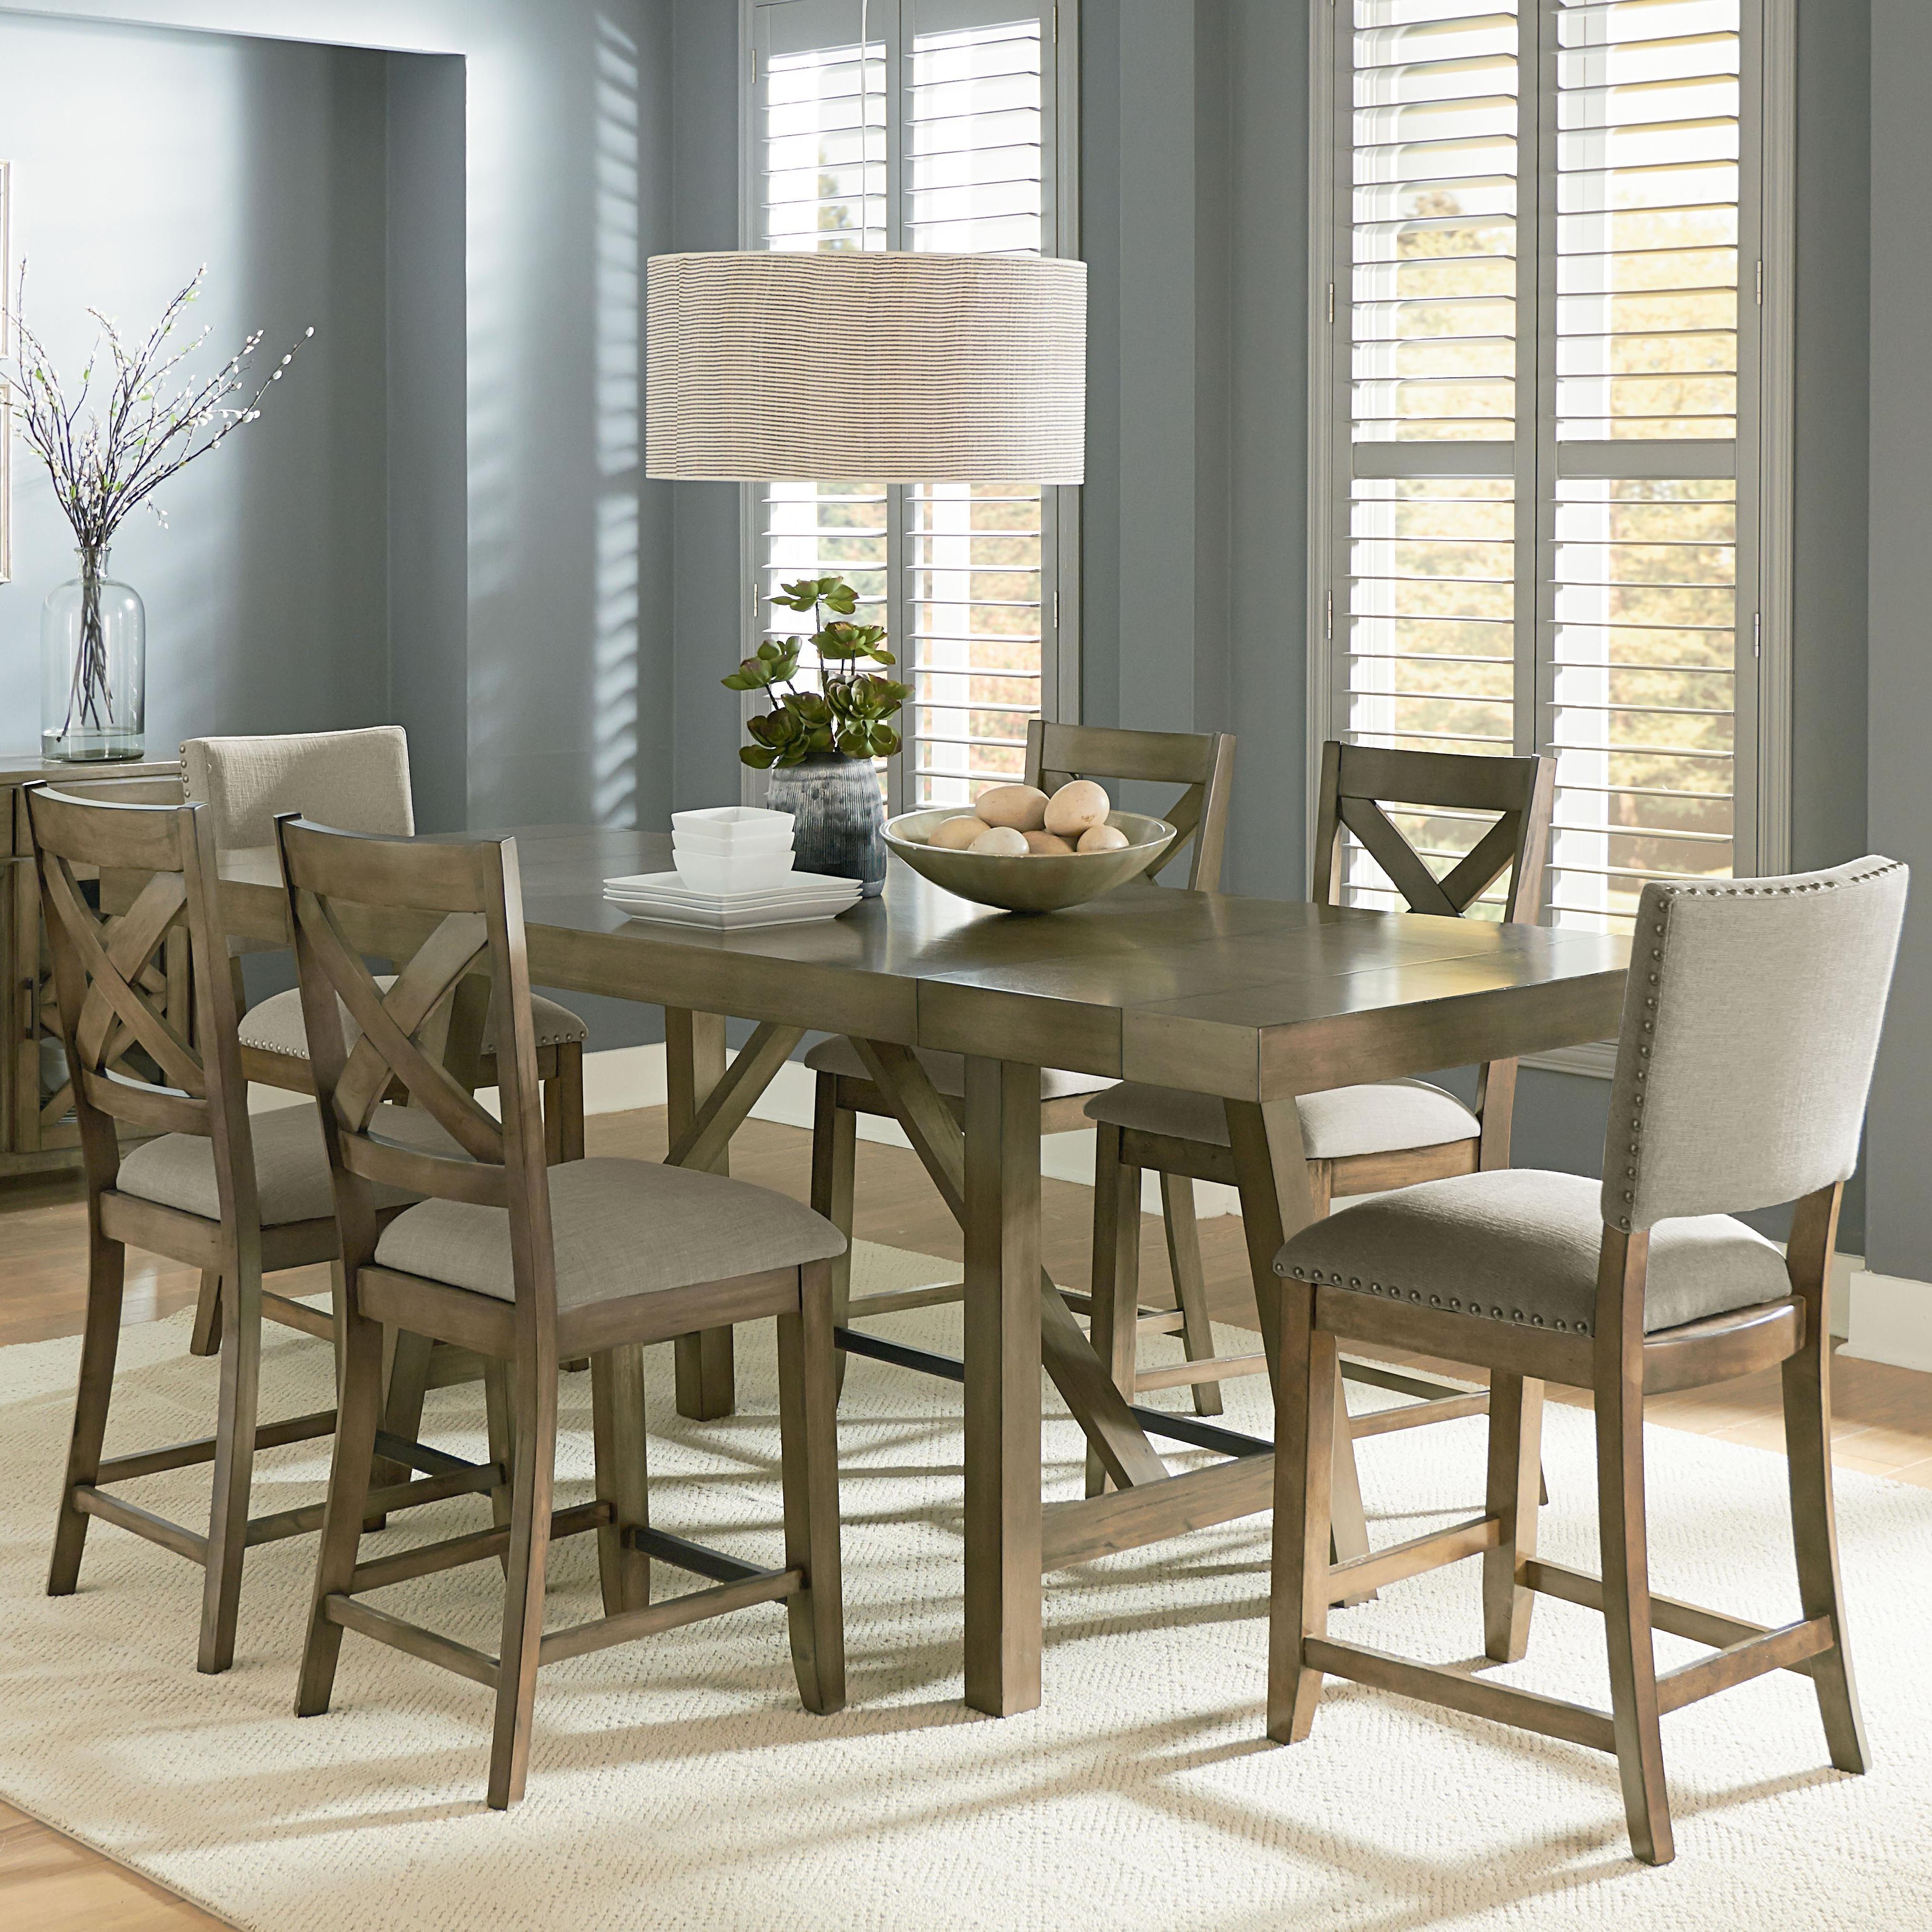 Dining Table Sets In Preferred Standard Furniture Omaha Grey Counter Height 7 Piece Dining Room (View 9 of 25)